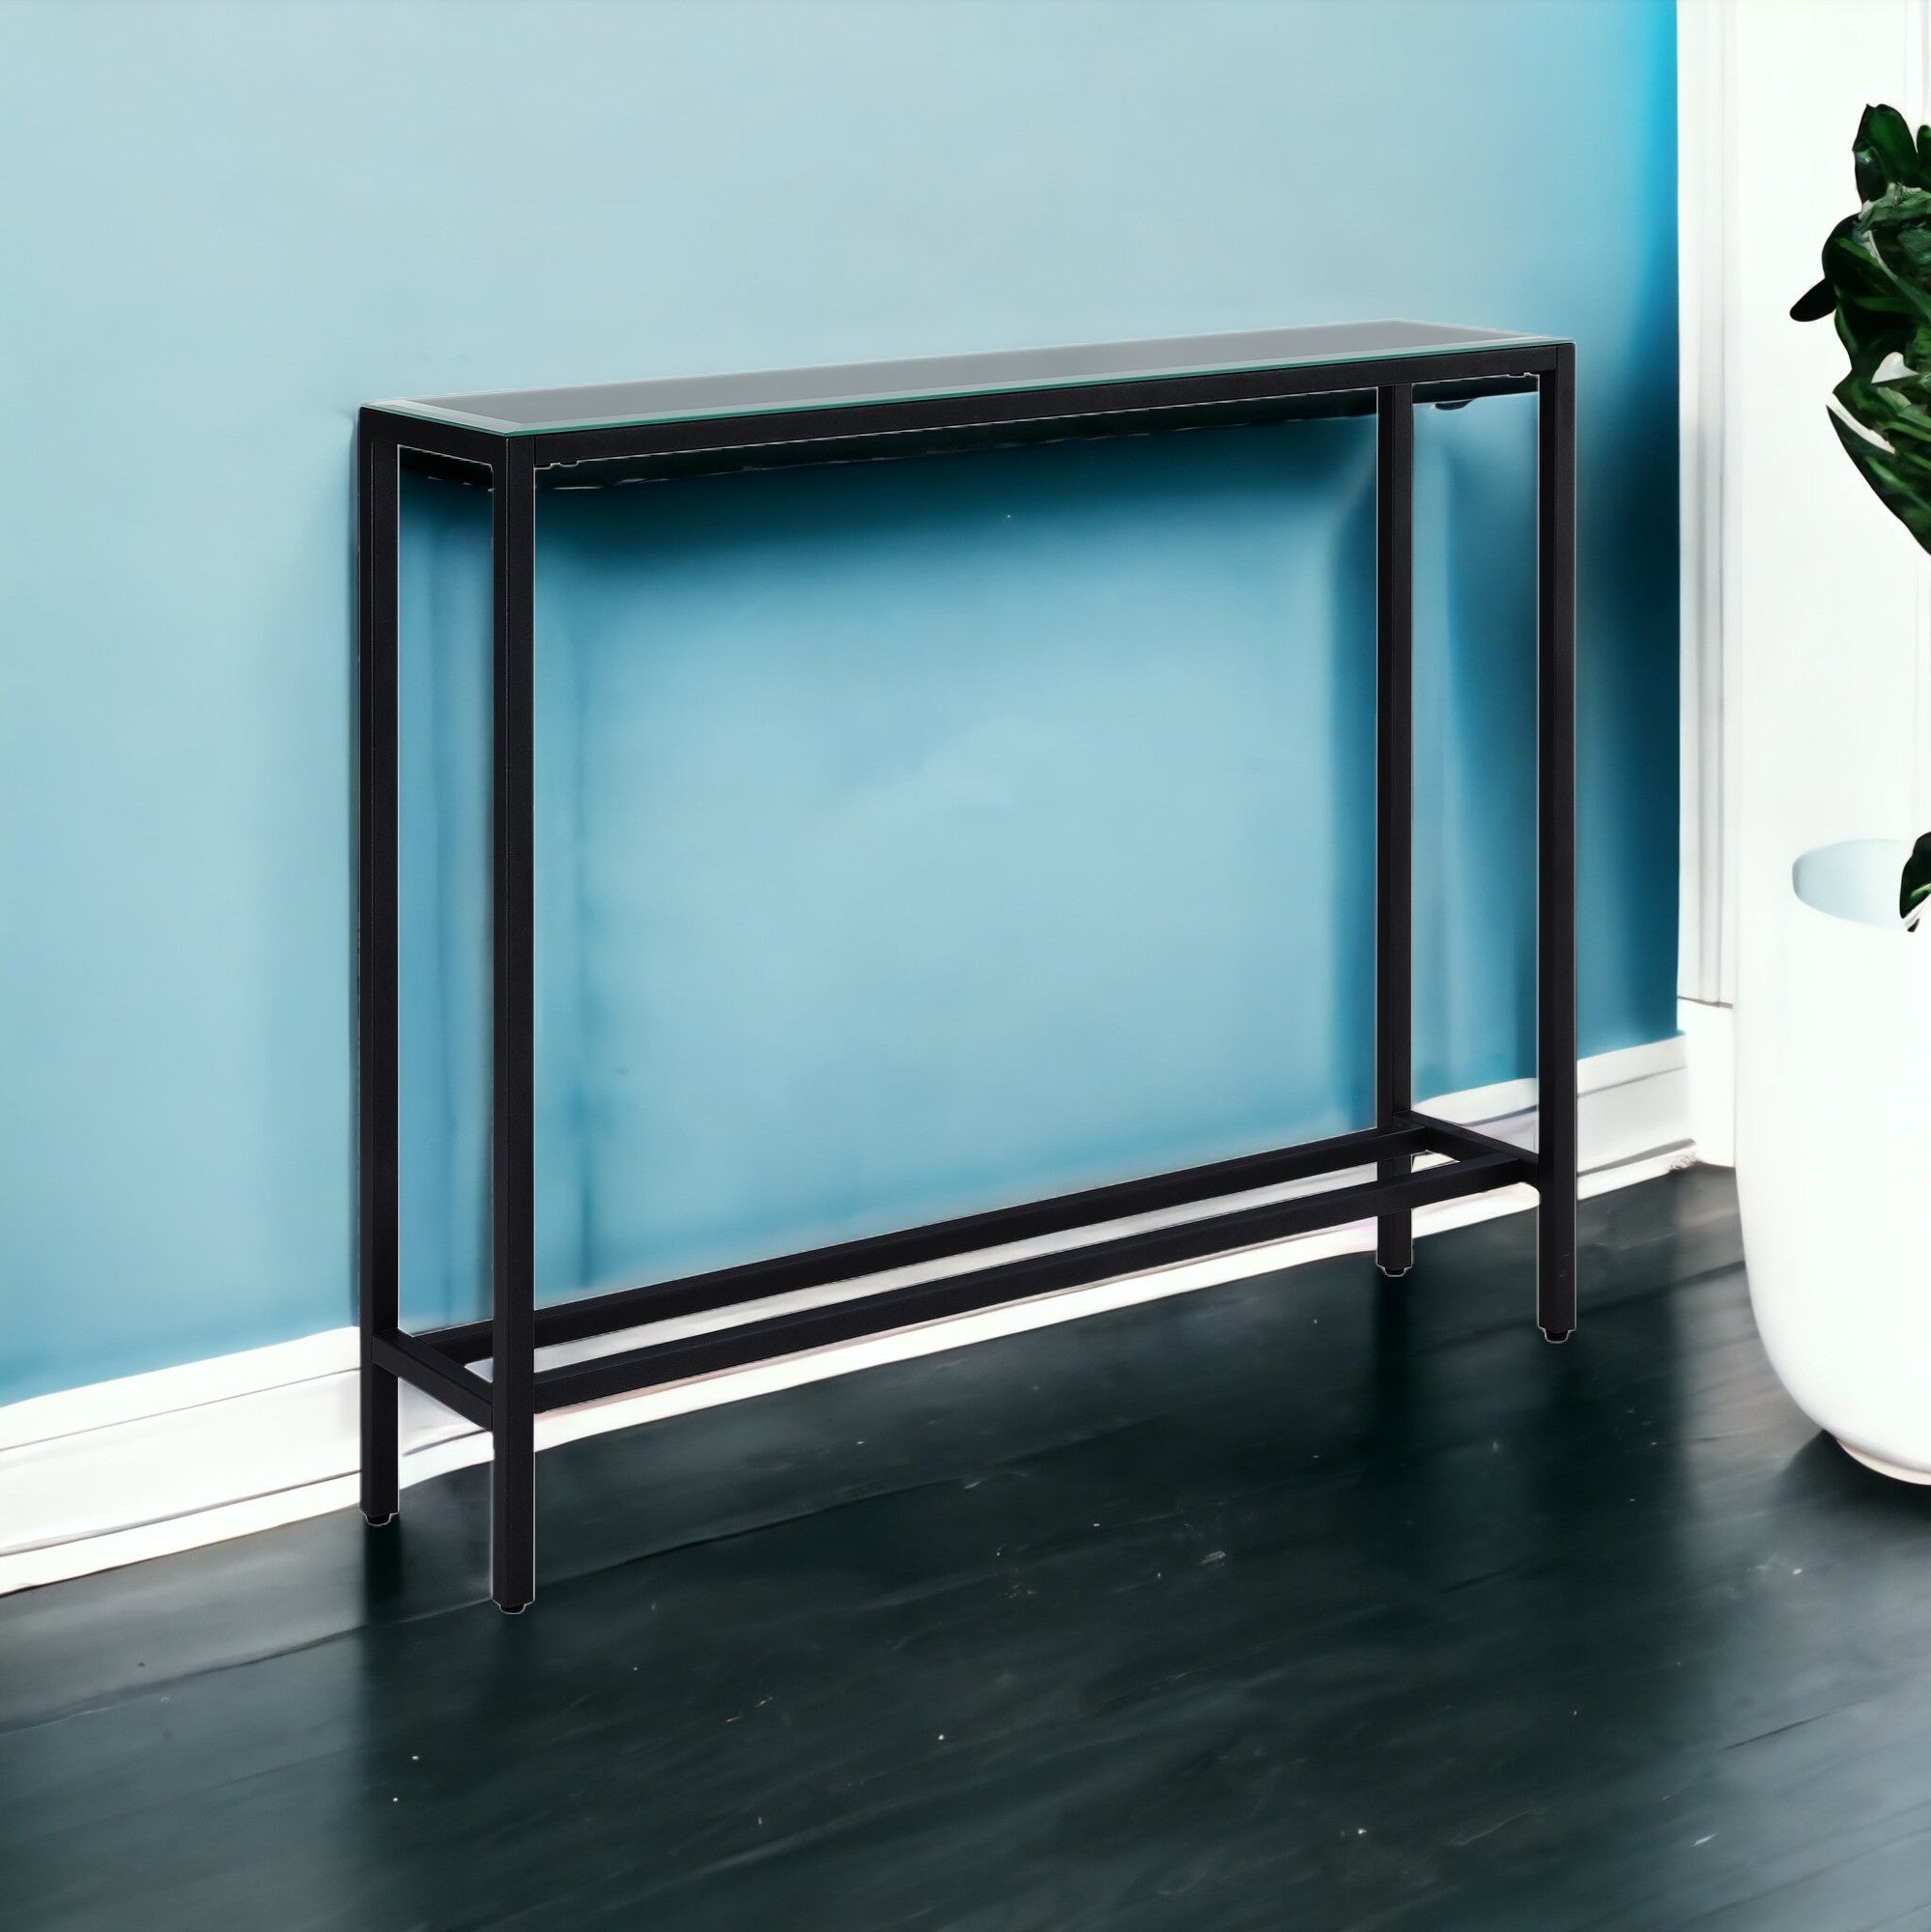 36" Black Mirrored Glass Console Table